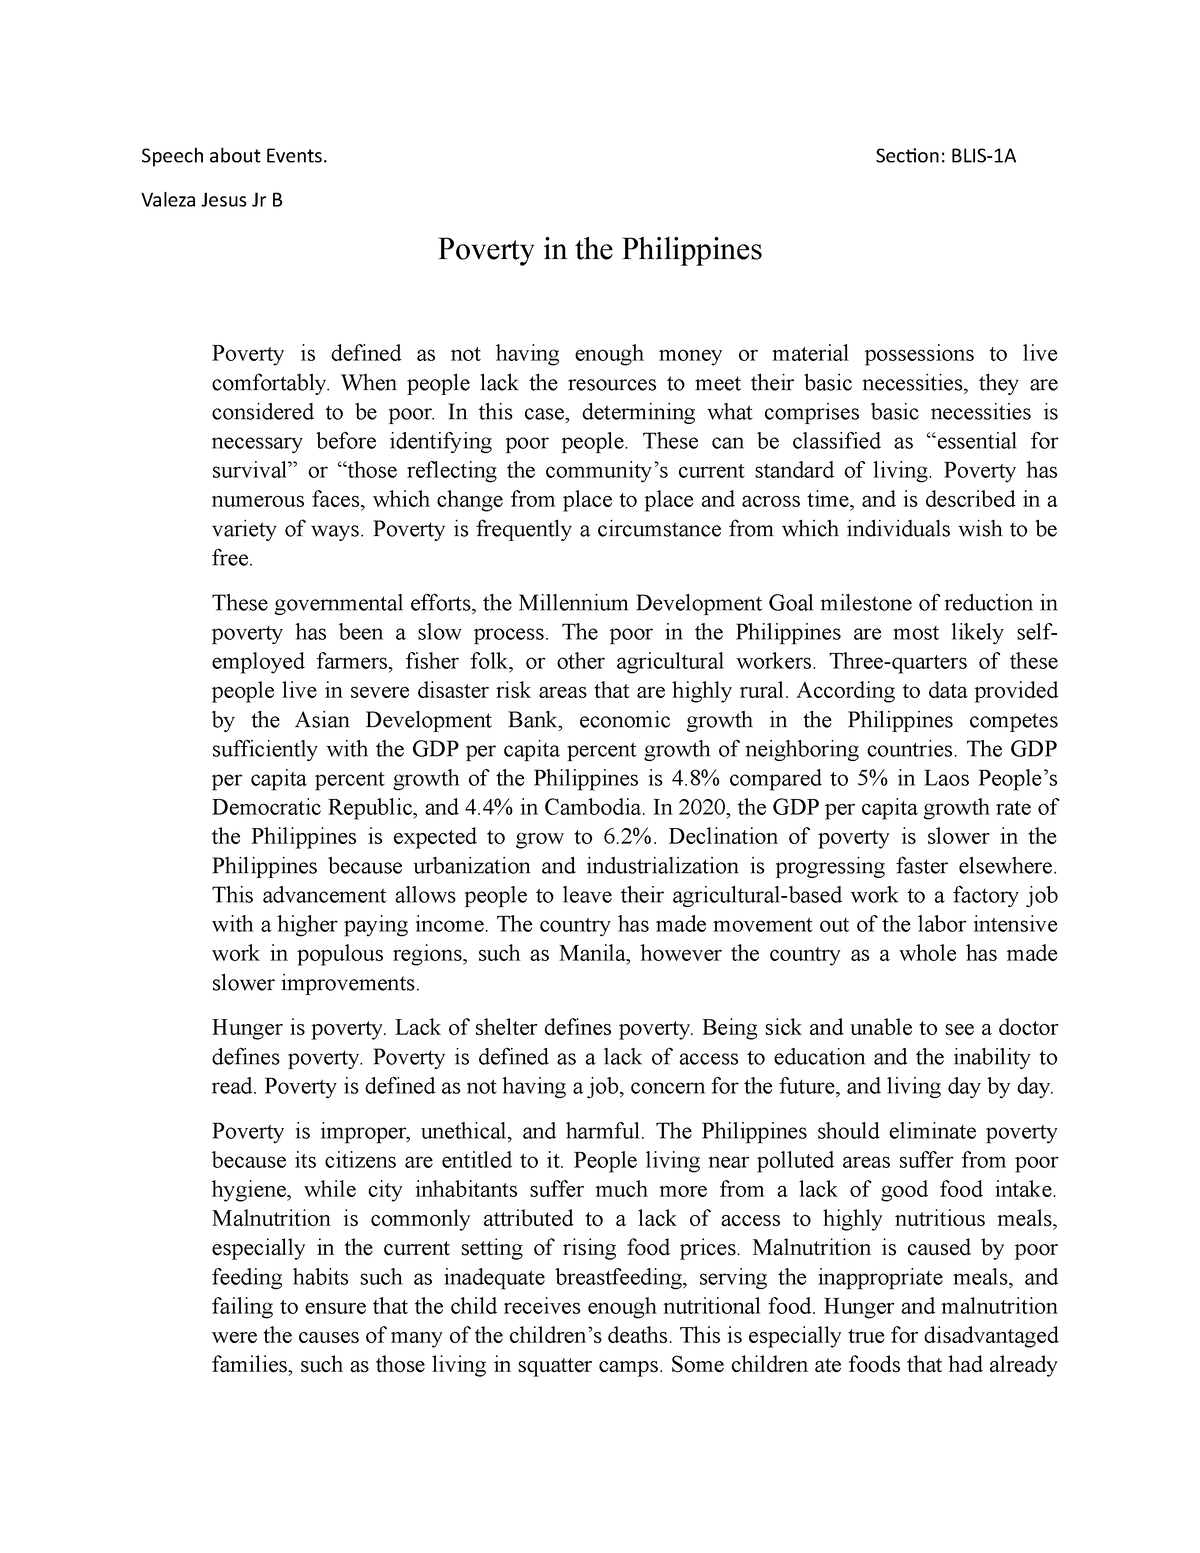 essay on poverty in the philippines